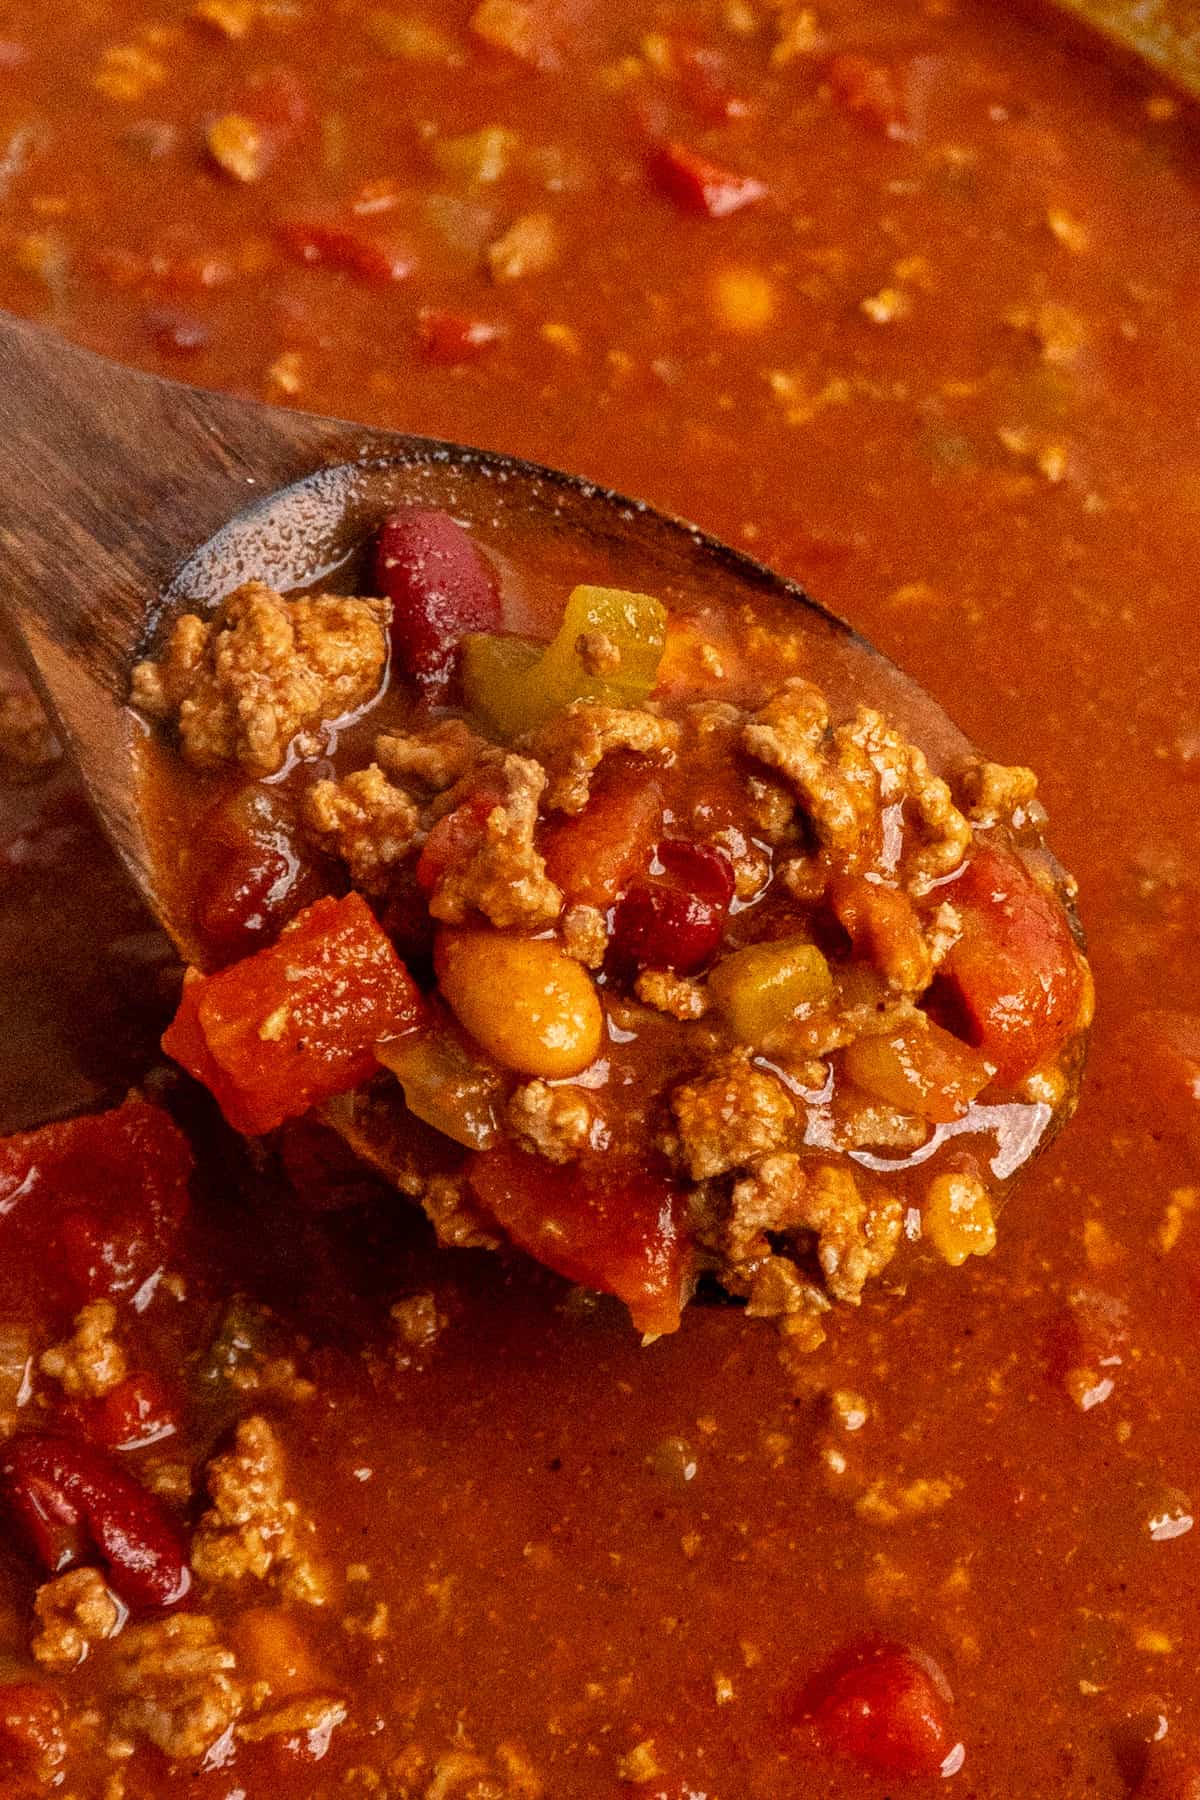 A wooden spoon holding a scoop of chili.